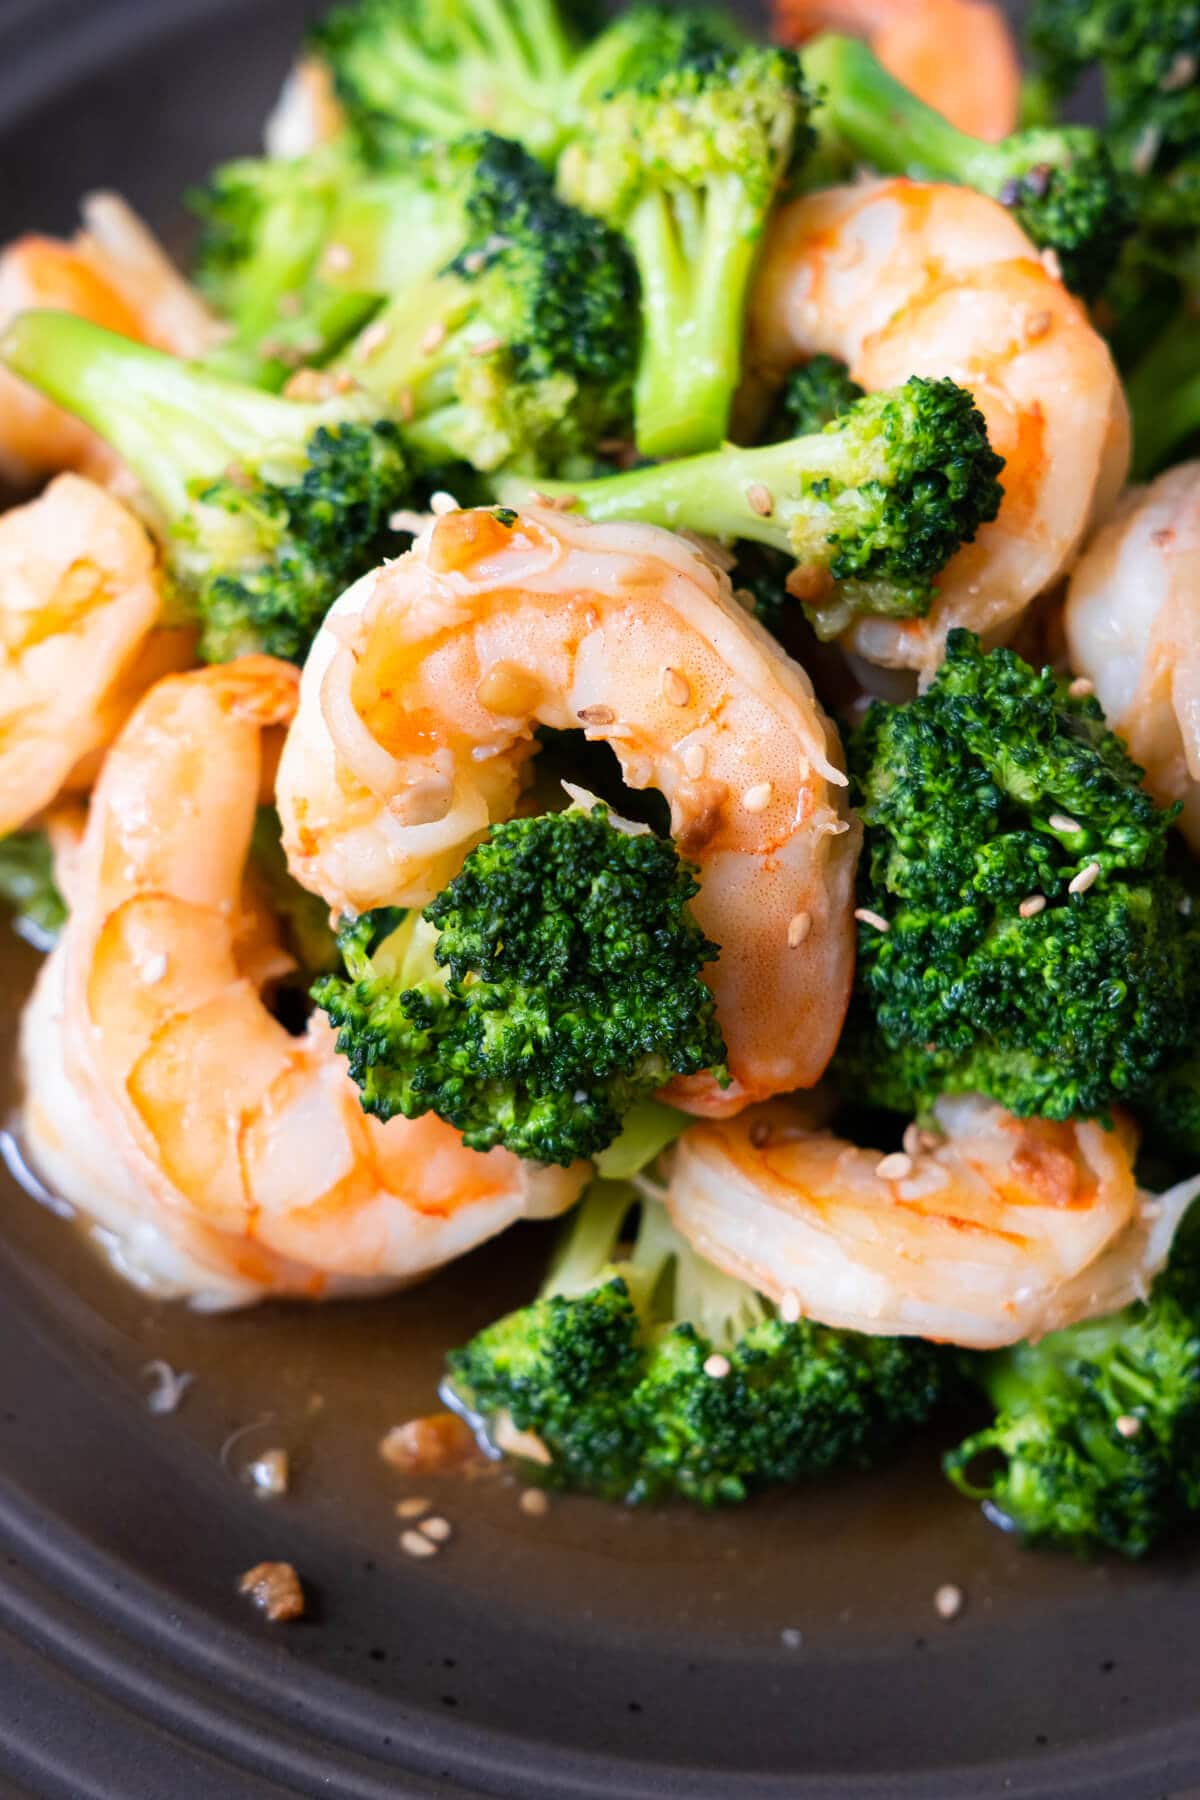 Delicious shrimp and broccoli stir fry to crunchy and coated with flavorful brown sauce. 